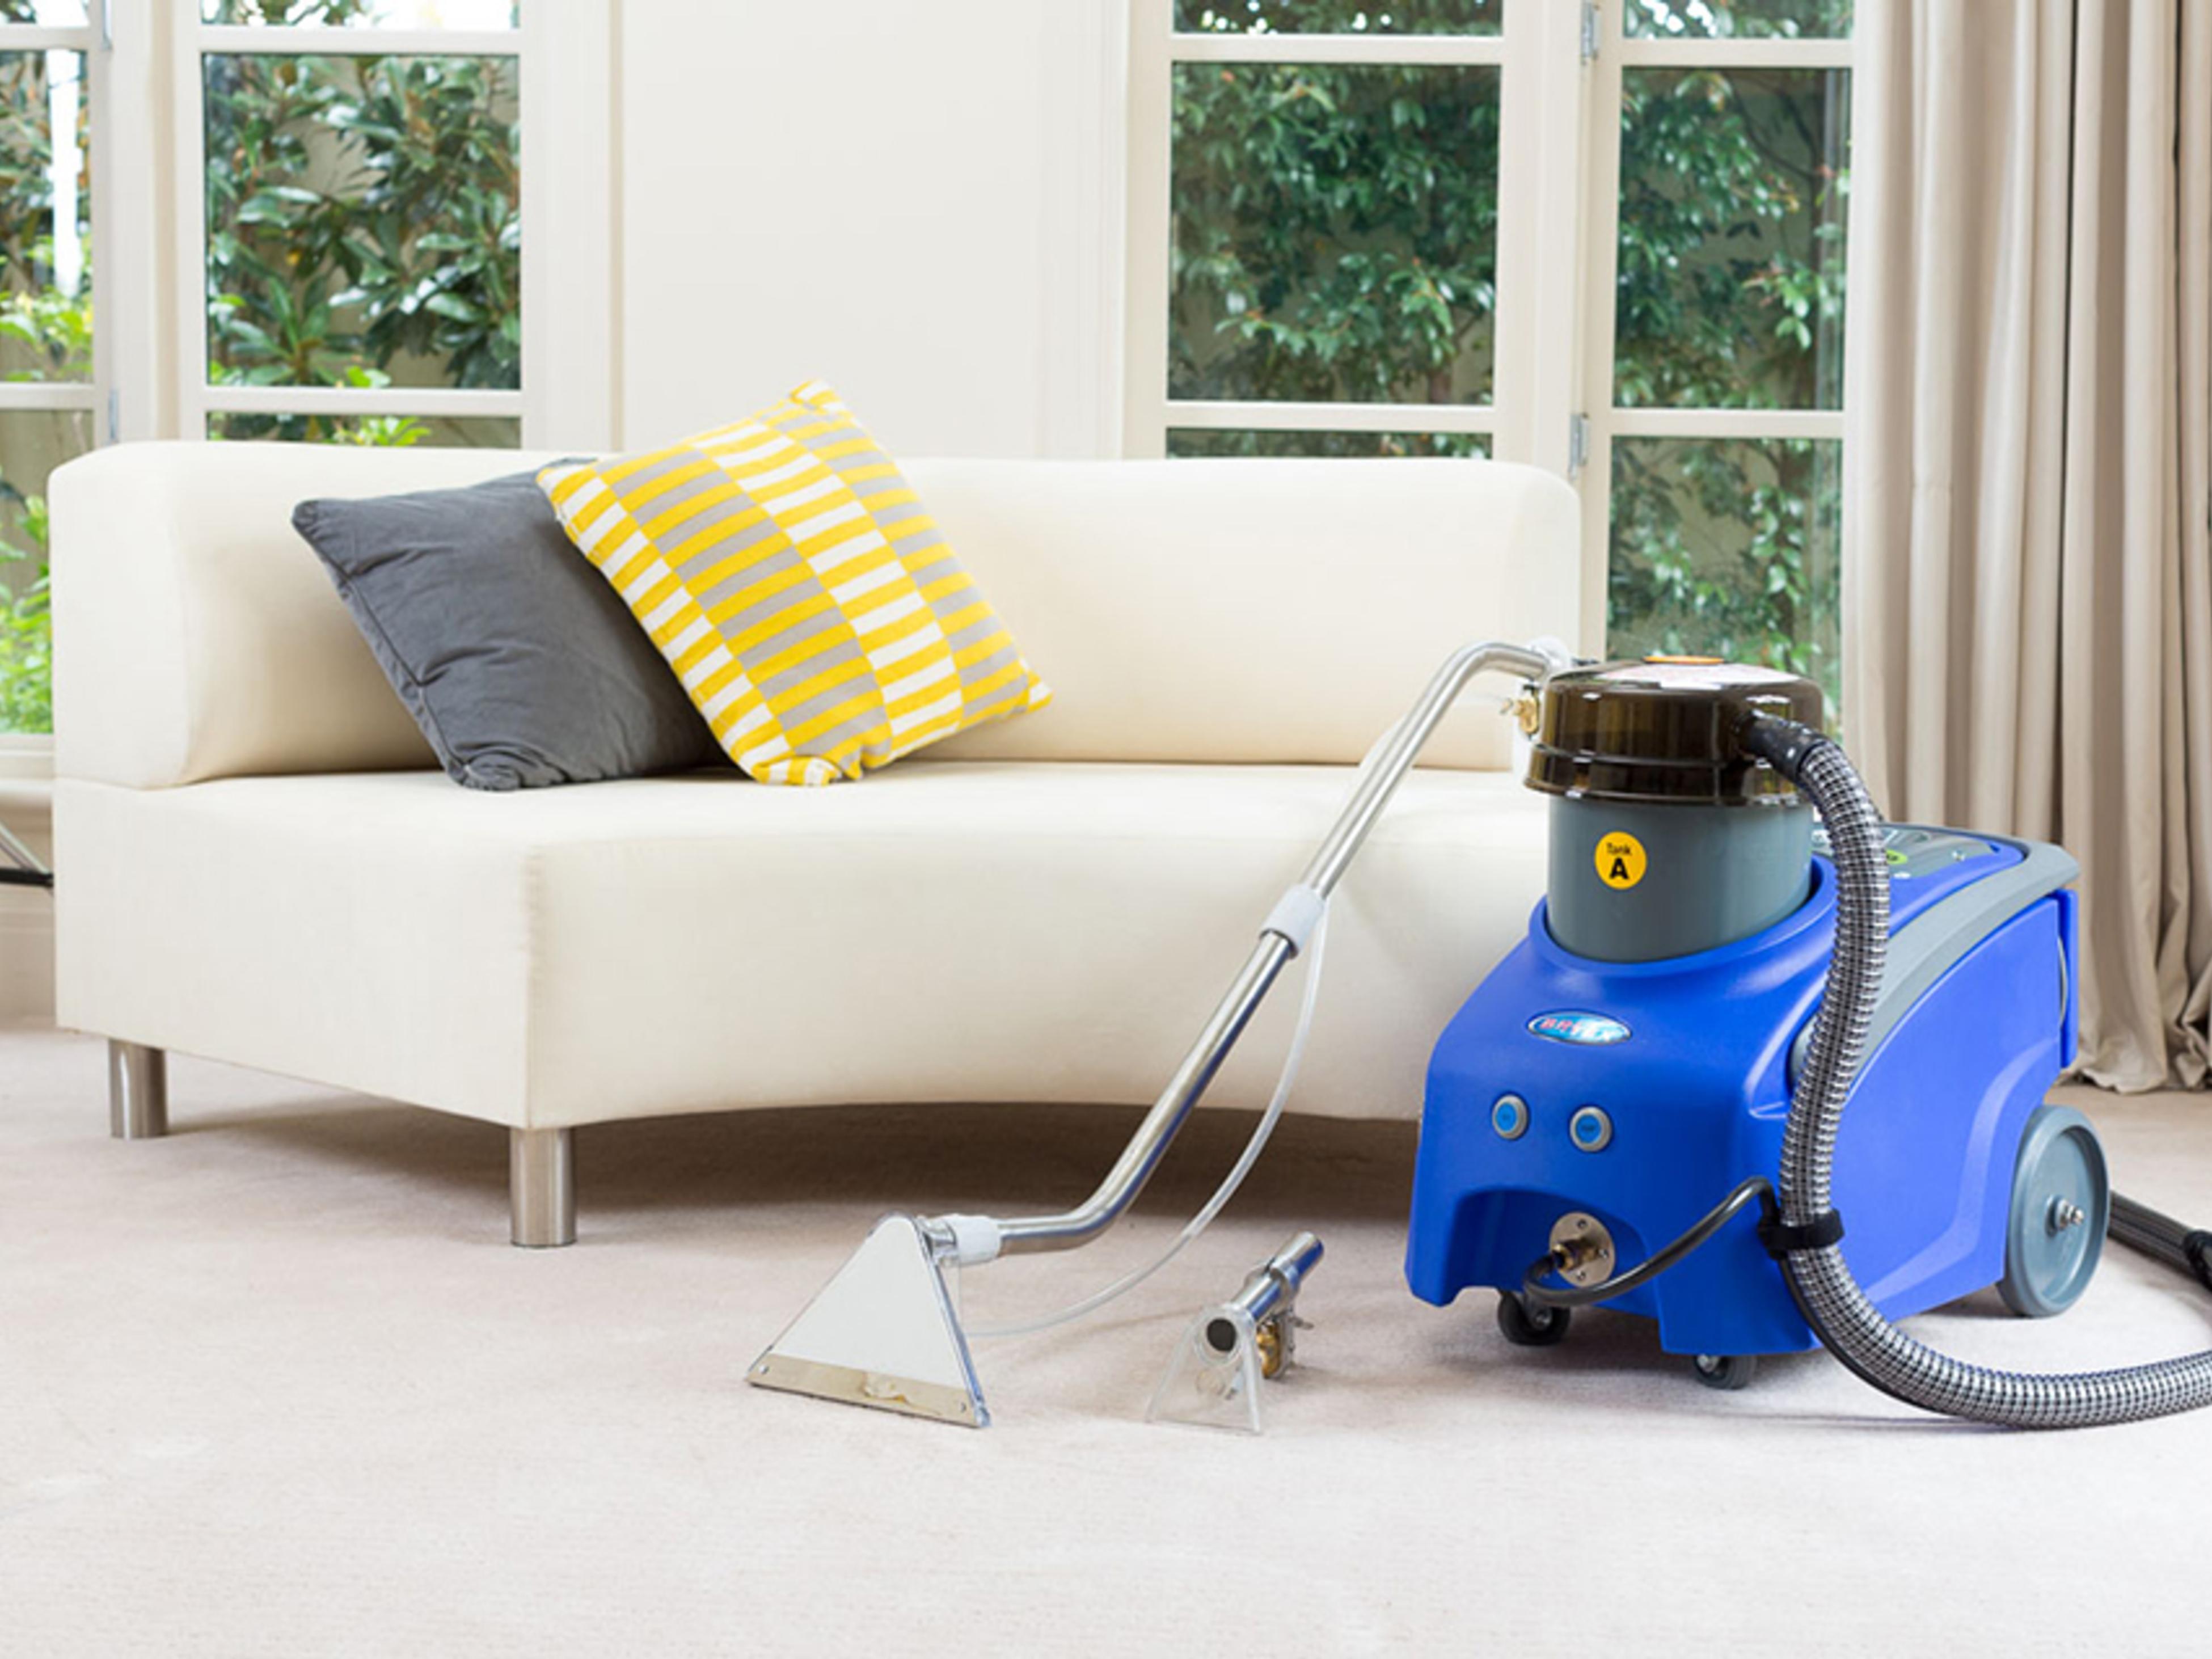 Tips For Using a Britex Carpet Cleaner - Bunnings Australia